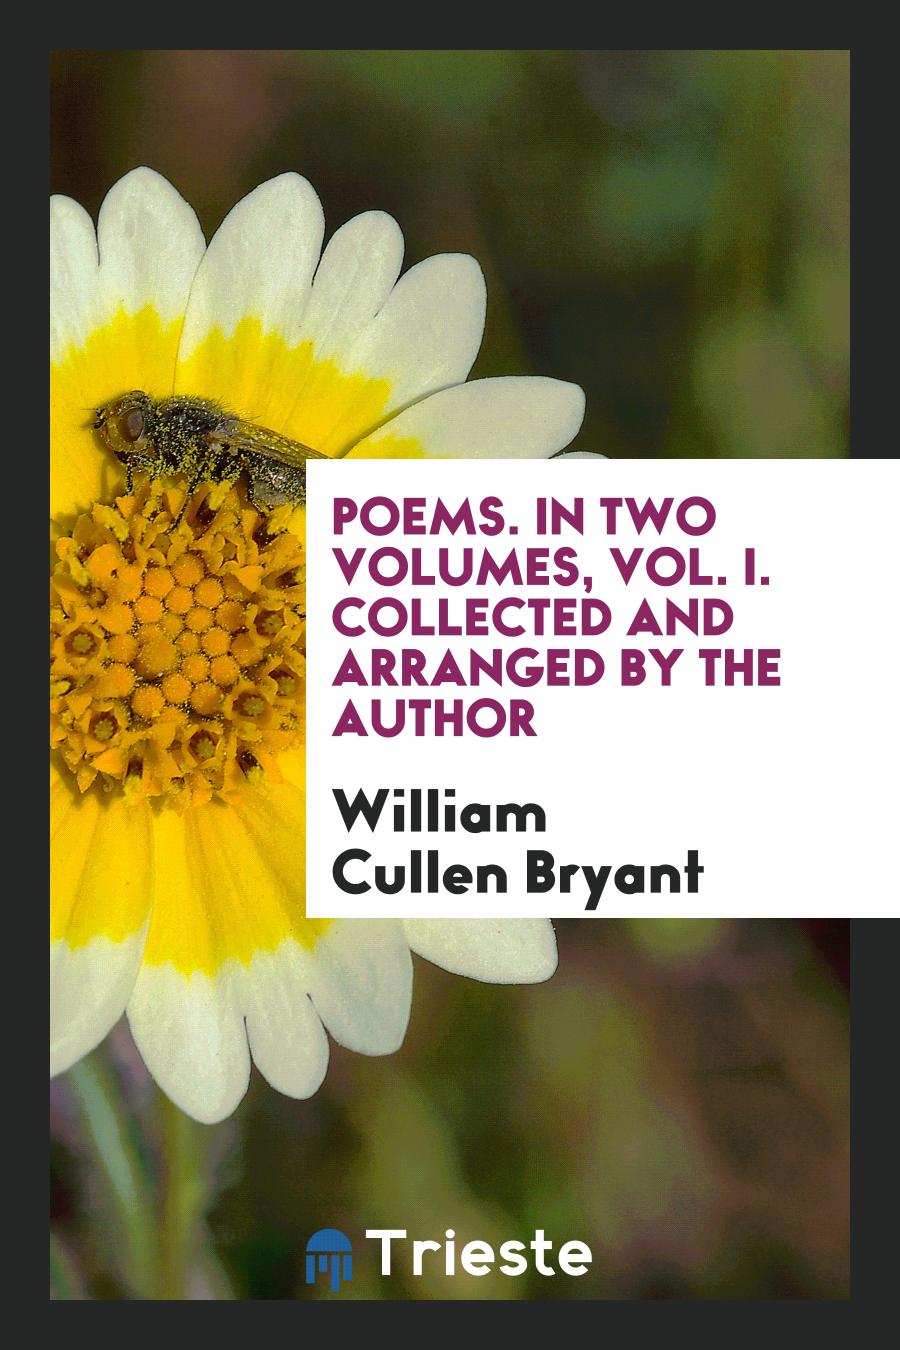 Poems. In Two Volumes, Vol. I. Collected and Arranged by the Author